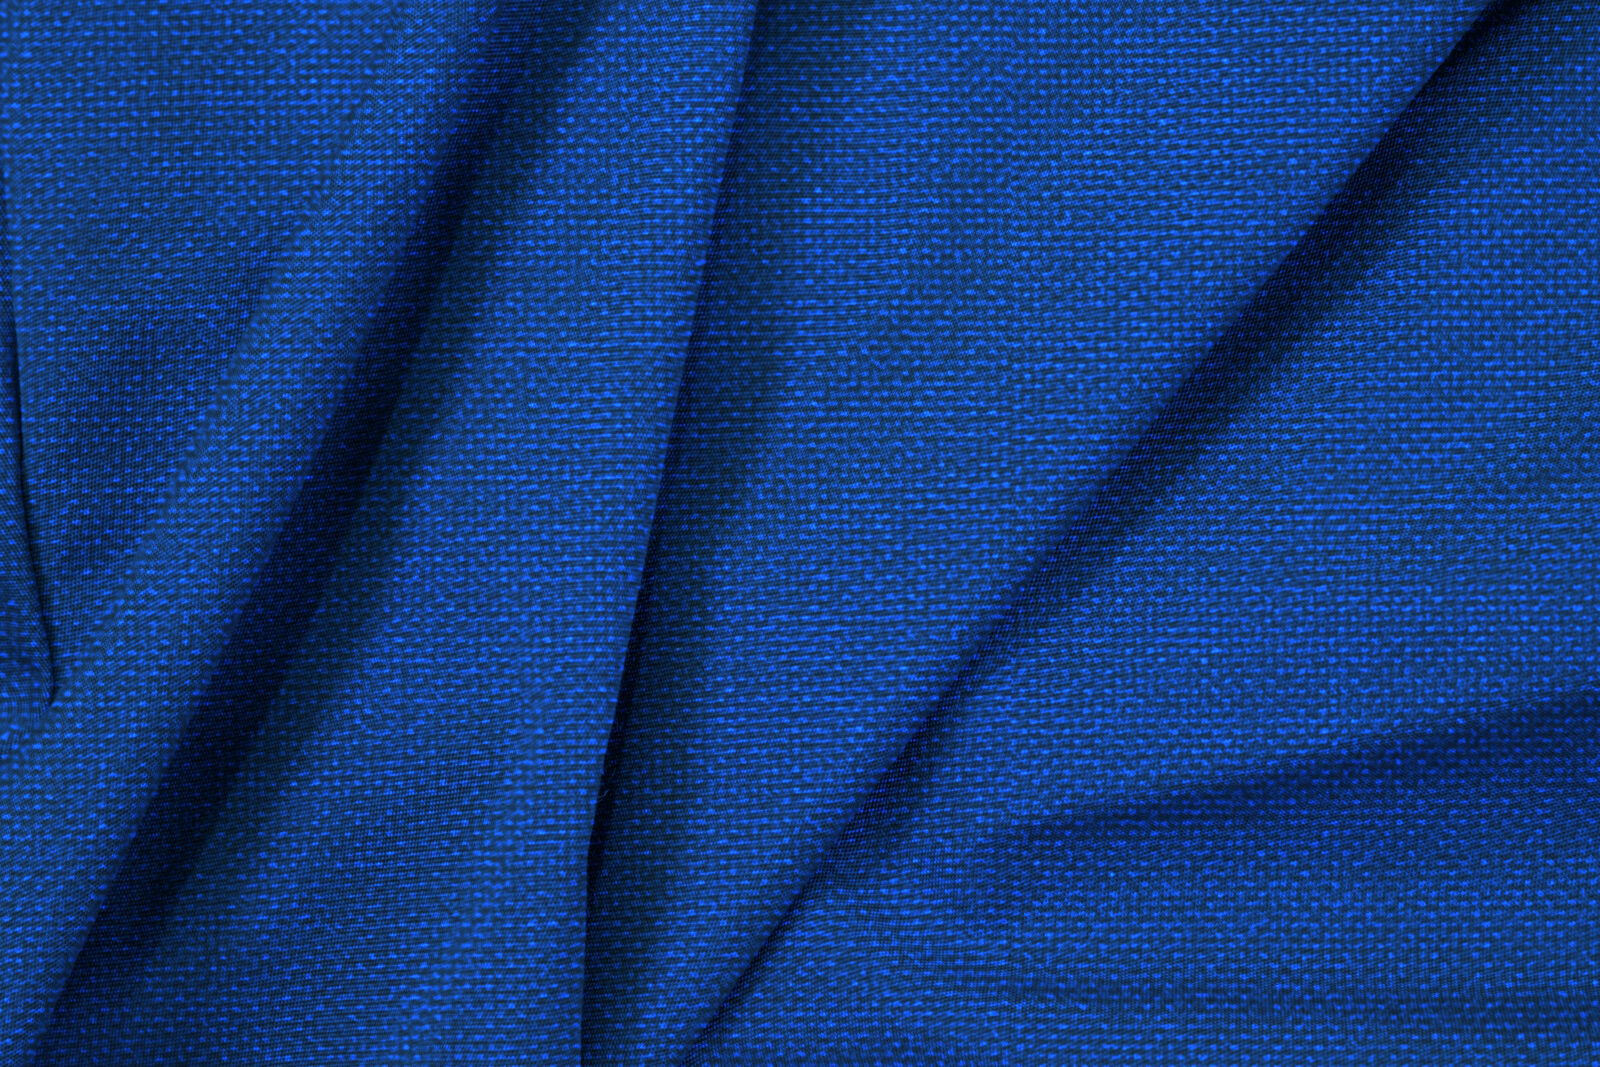 NEWCanvas_BuddabagBlue-Material2-scaled